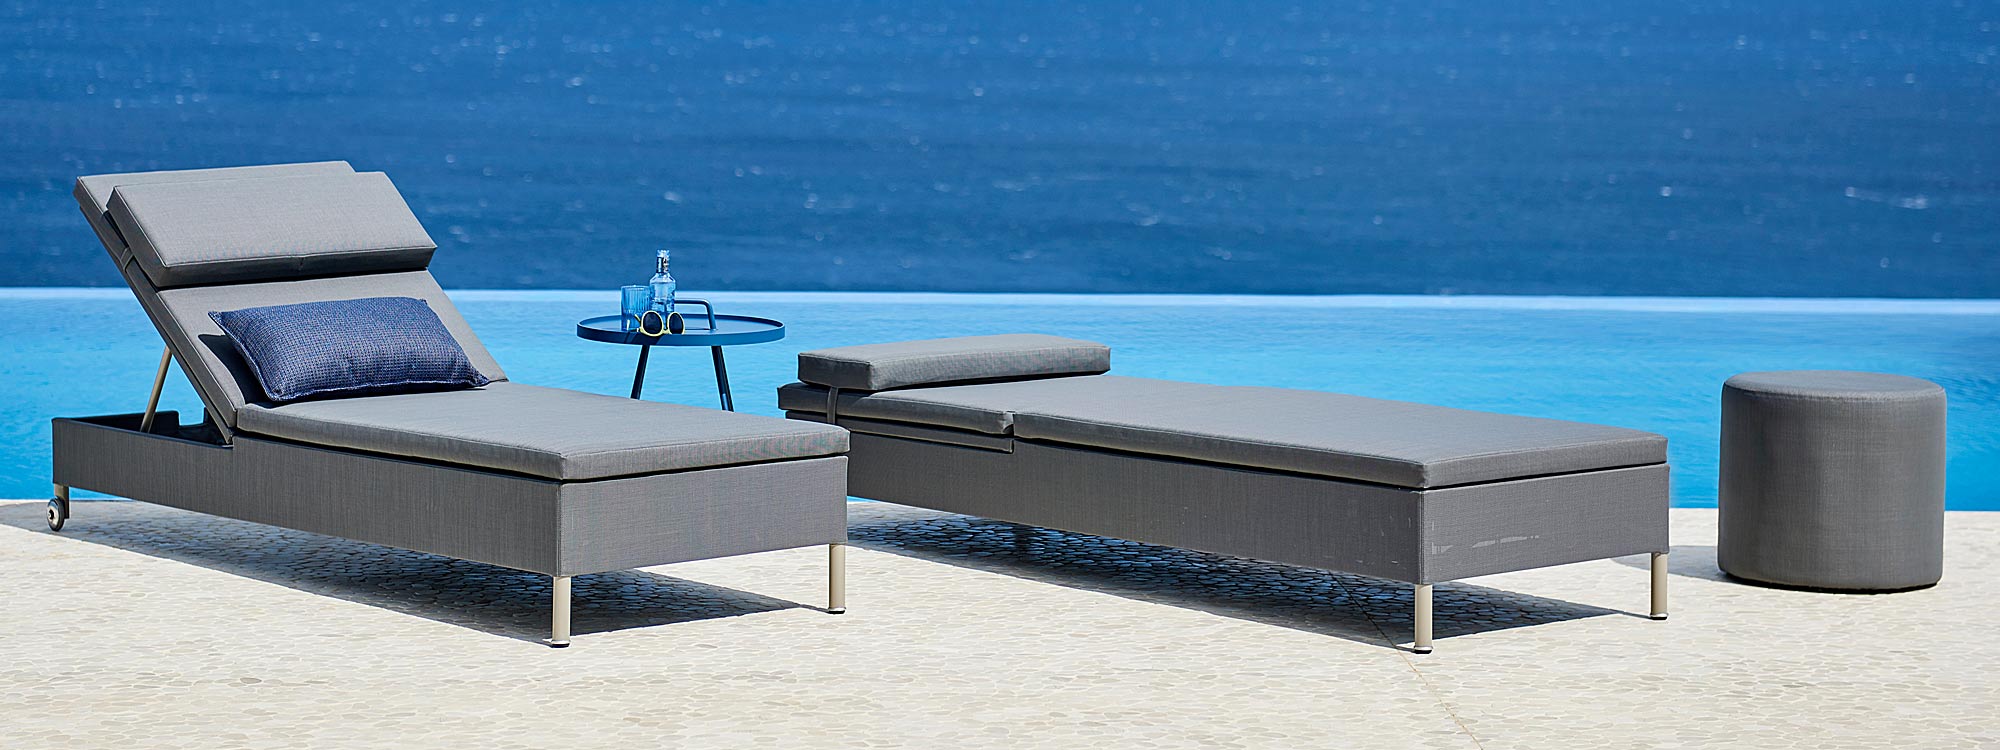 Rest contemporary sunbed is single or twin sun lounger in high quality sun lounger materials by Cane-line garden furniture company.